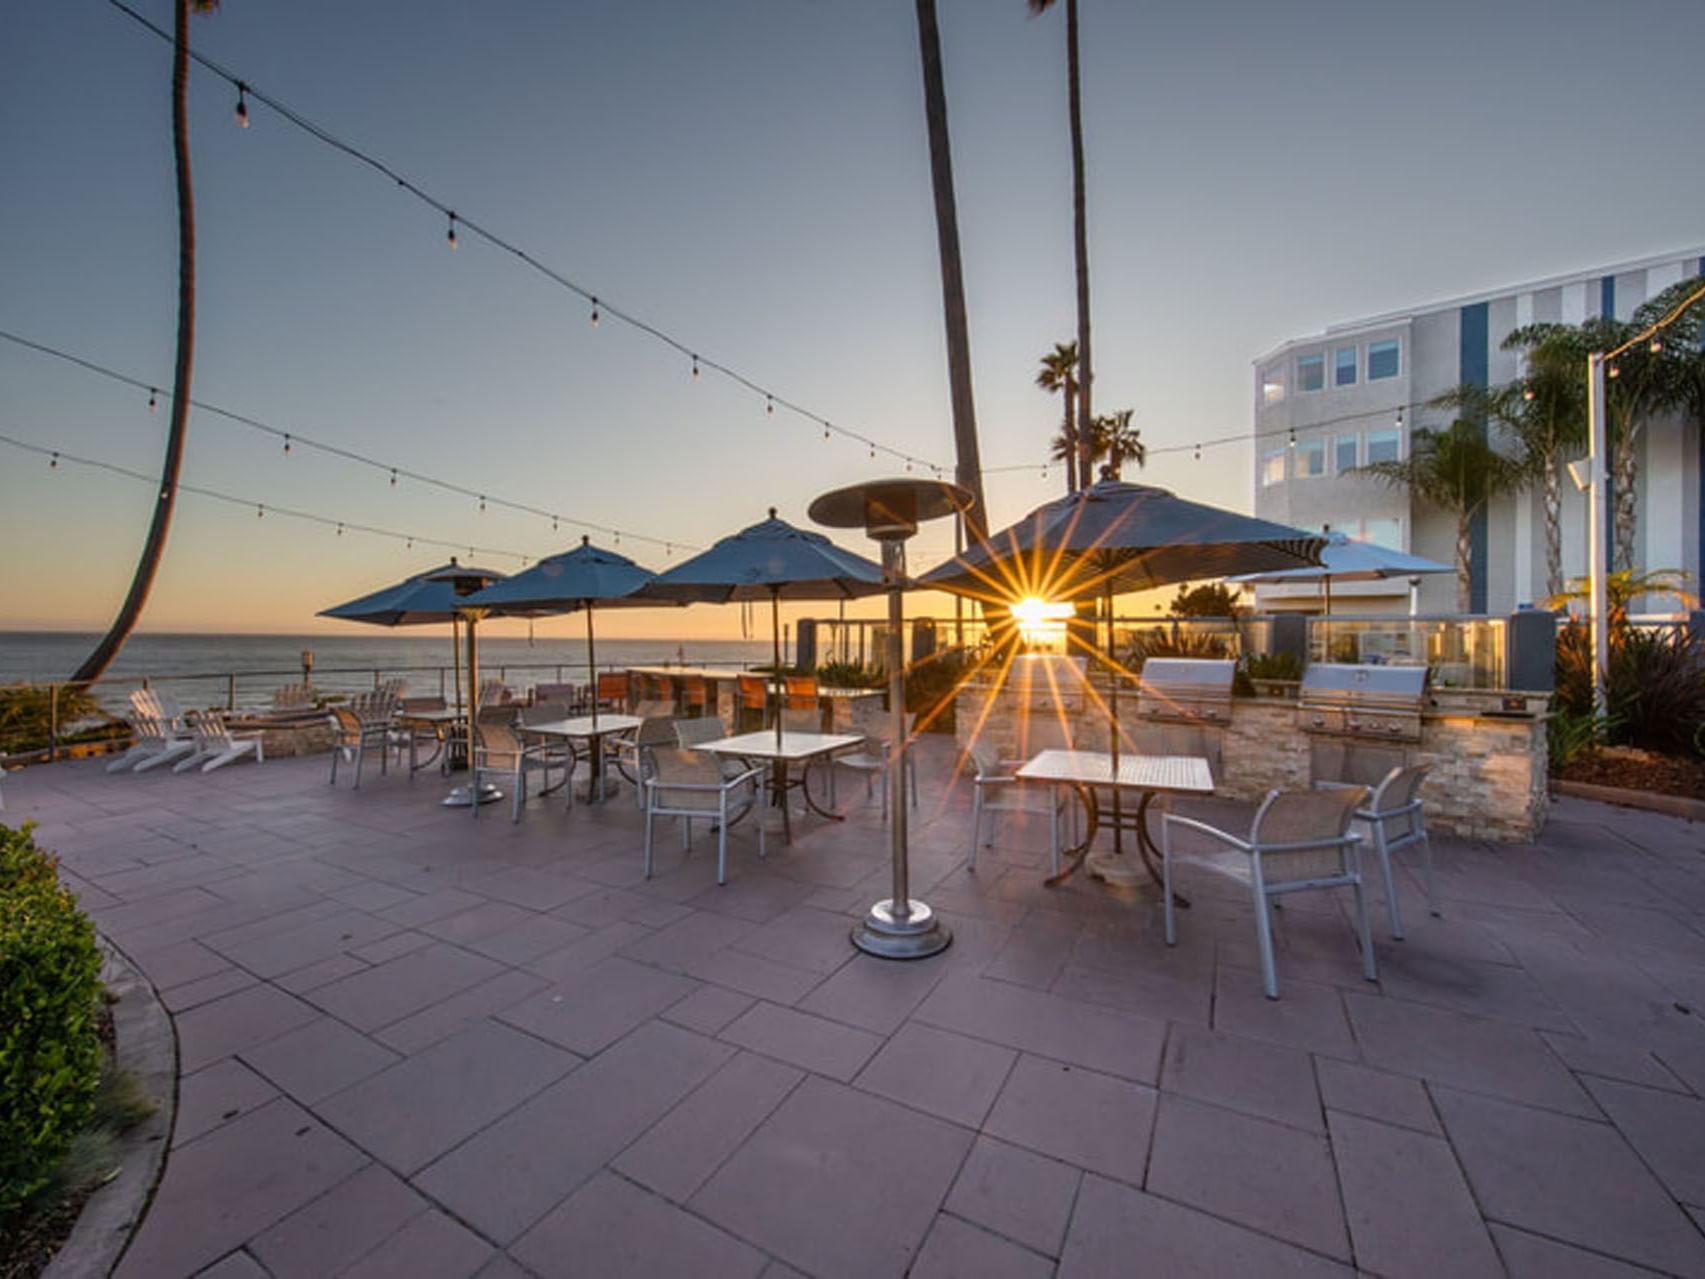 Seamist Terrace at sunset with a cozy seating area in SeaCrest Oceanfront Hotel Pismo Beach